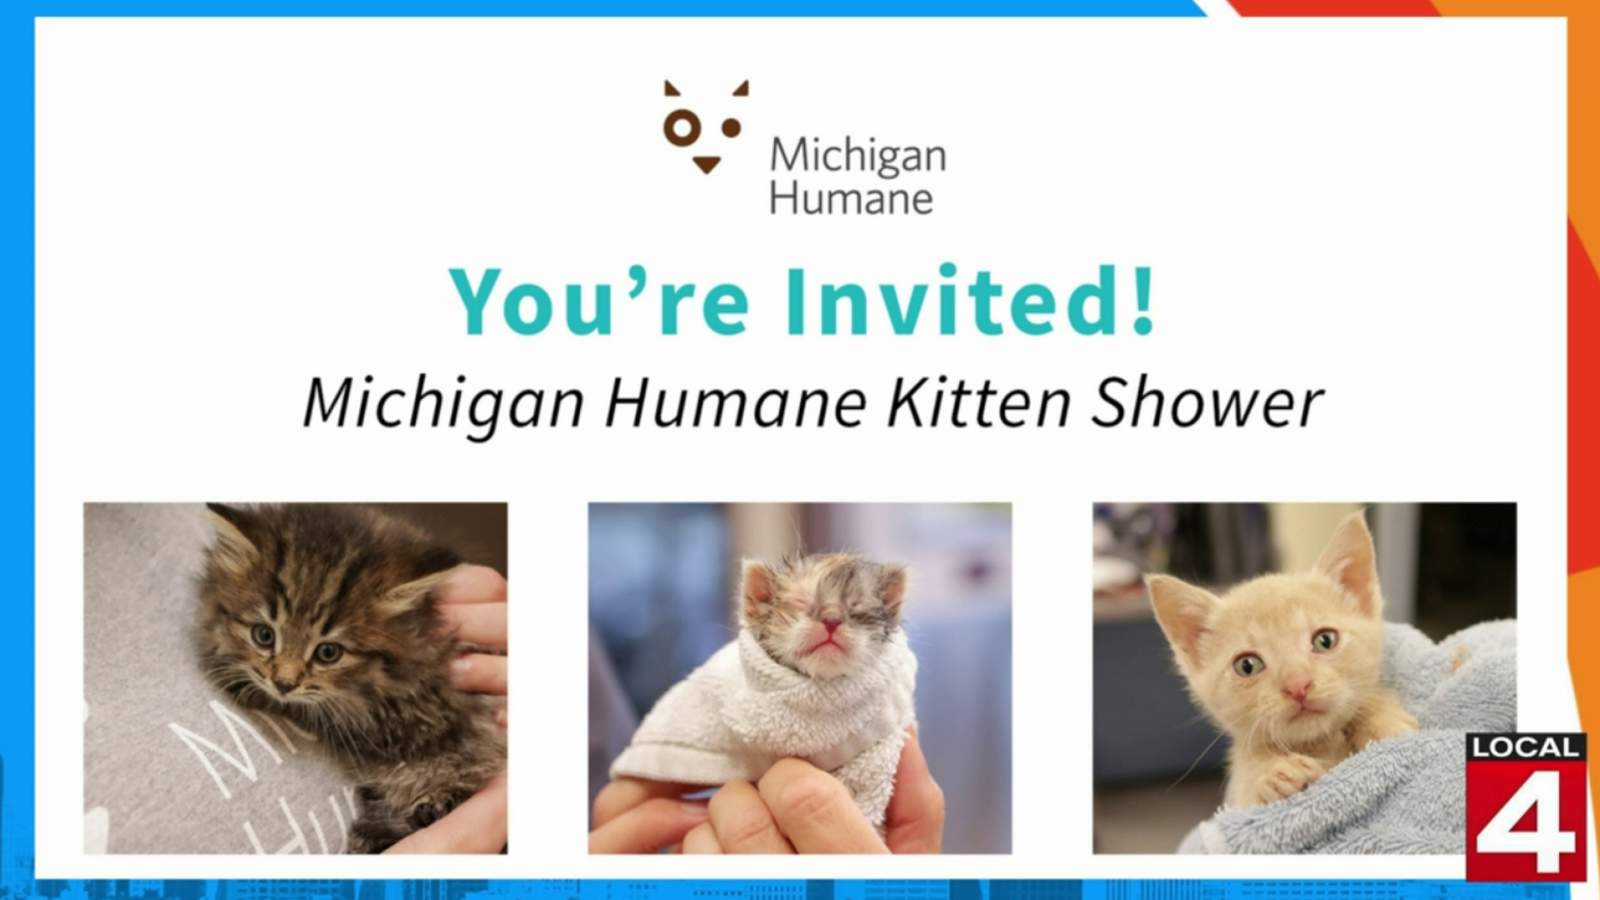 This Kitten Shower aims to help kittens in need -- and you can help